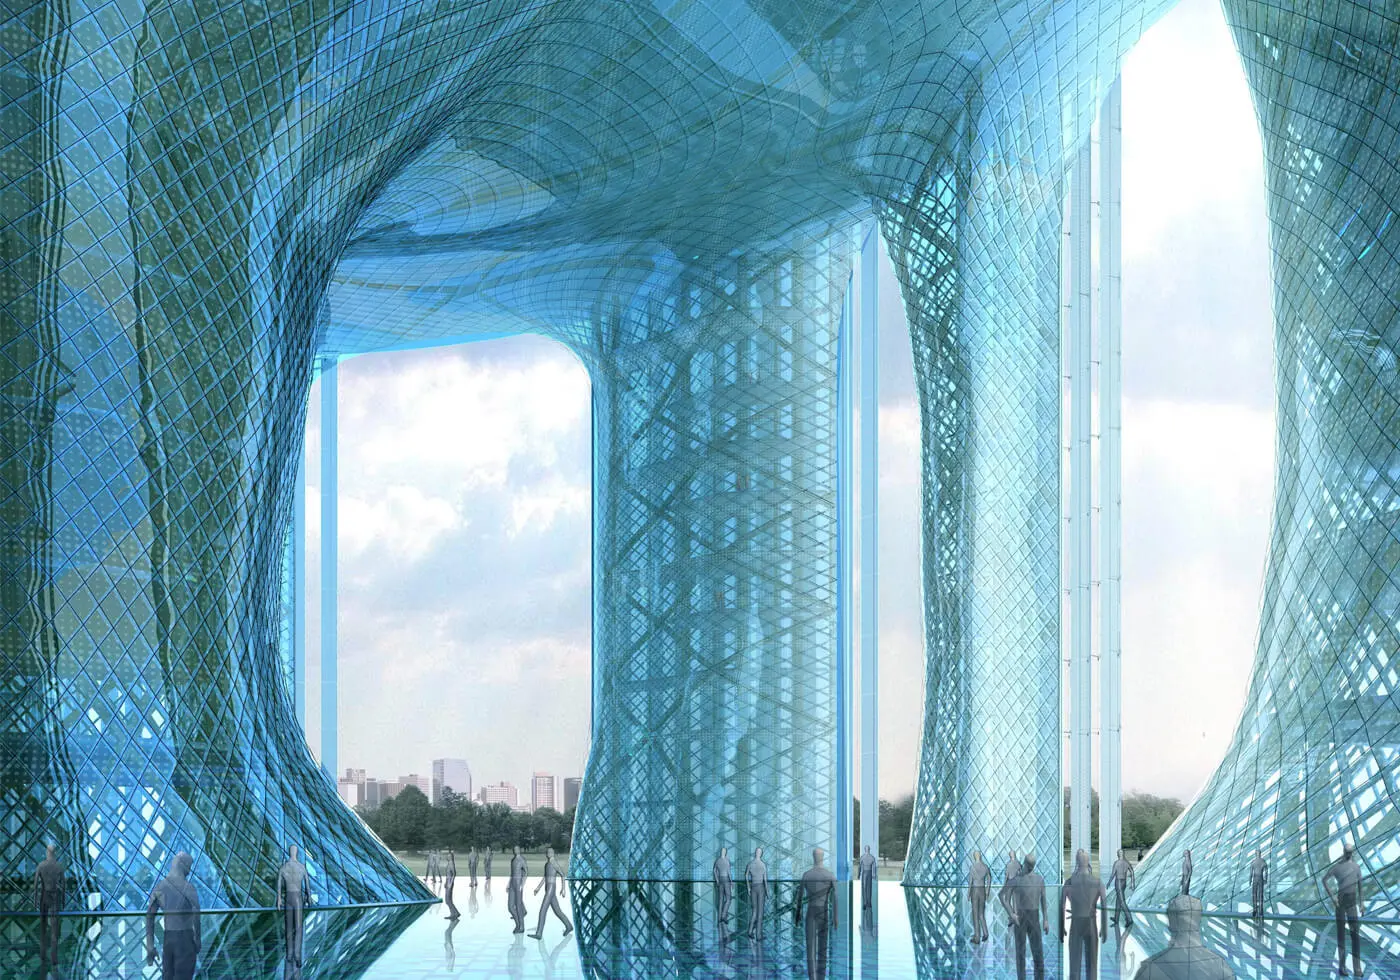 Origin Architect's design proposal with vast semi-covered space
